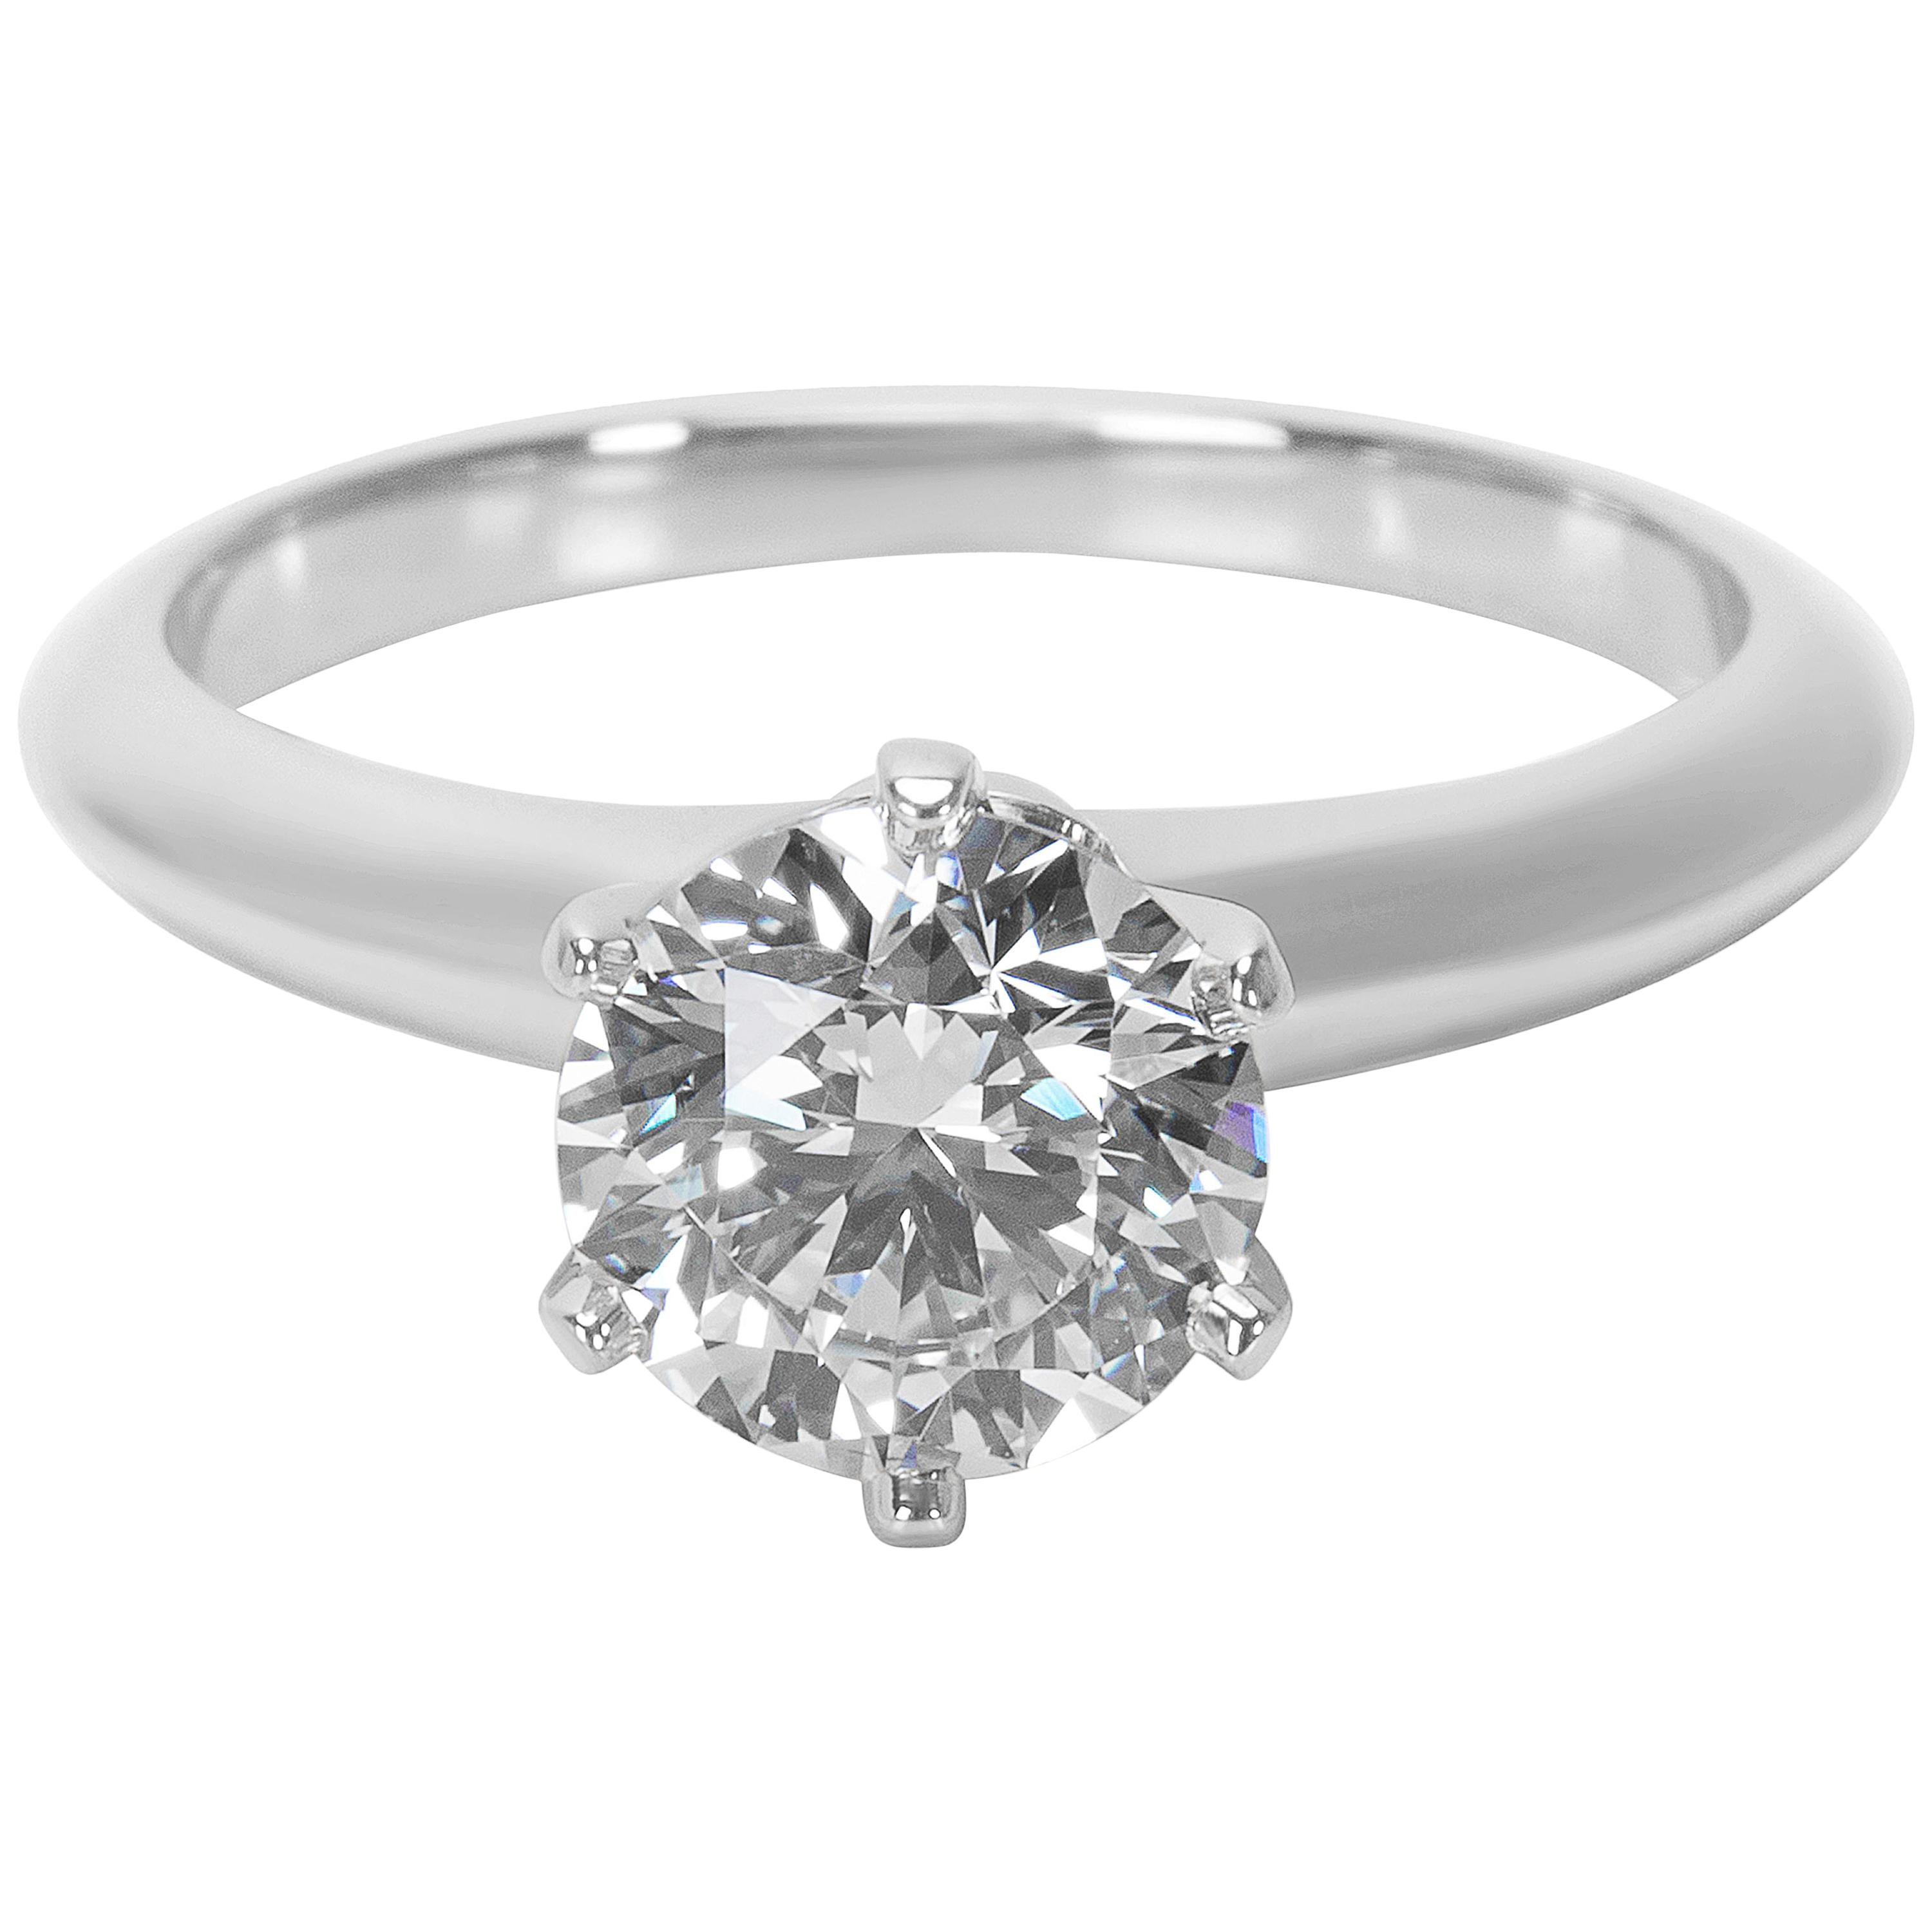 Tiffany & Co. Solitaire Ring in Platinum with Diamonds GIA Certified 1.17 Carat